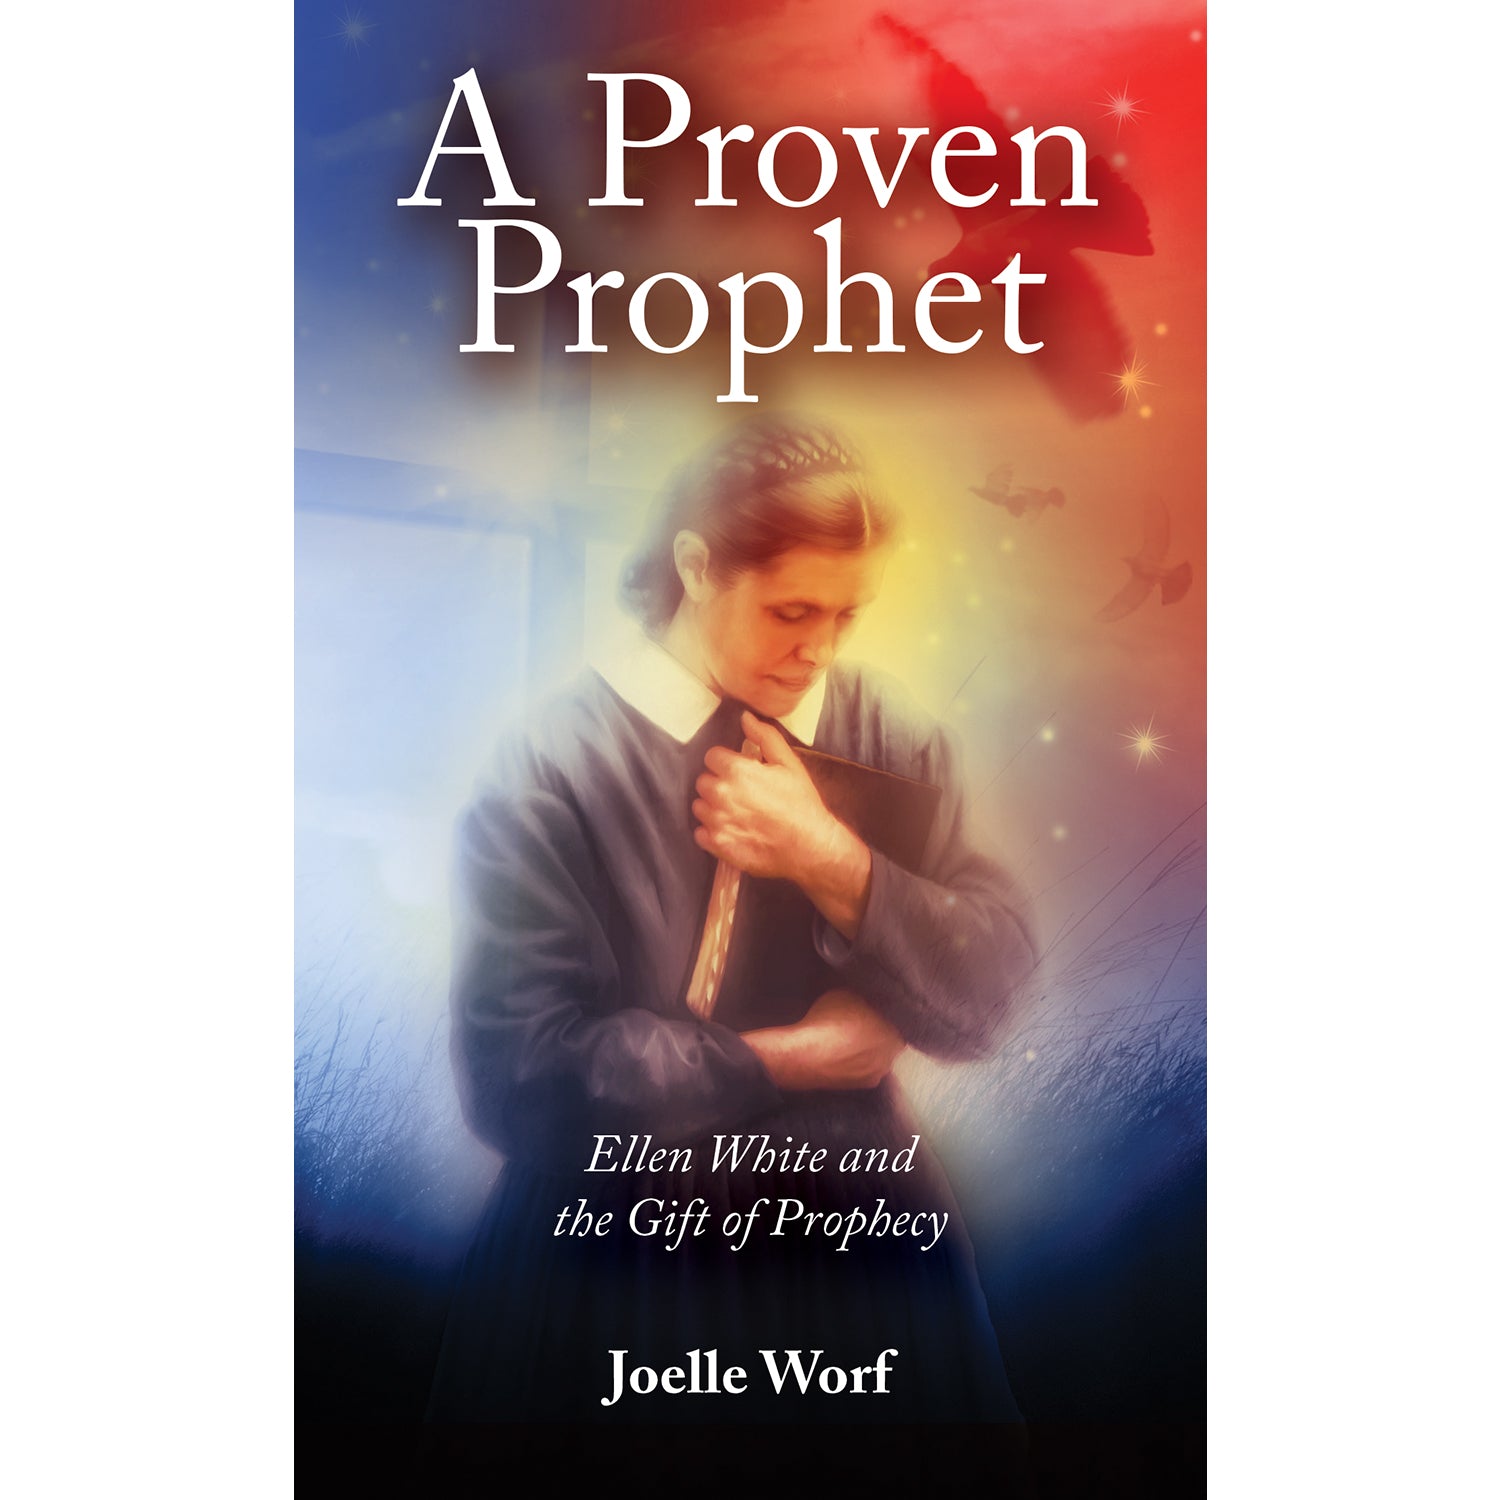 A Proven Prophet: Ellen White and the Gift of Prophecy by Joelle Worf